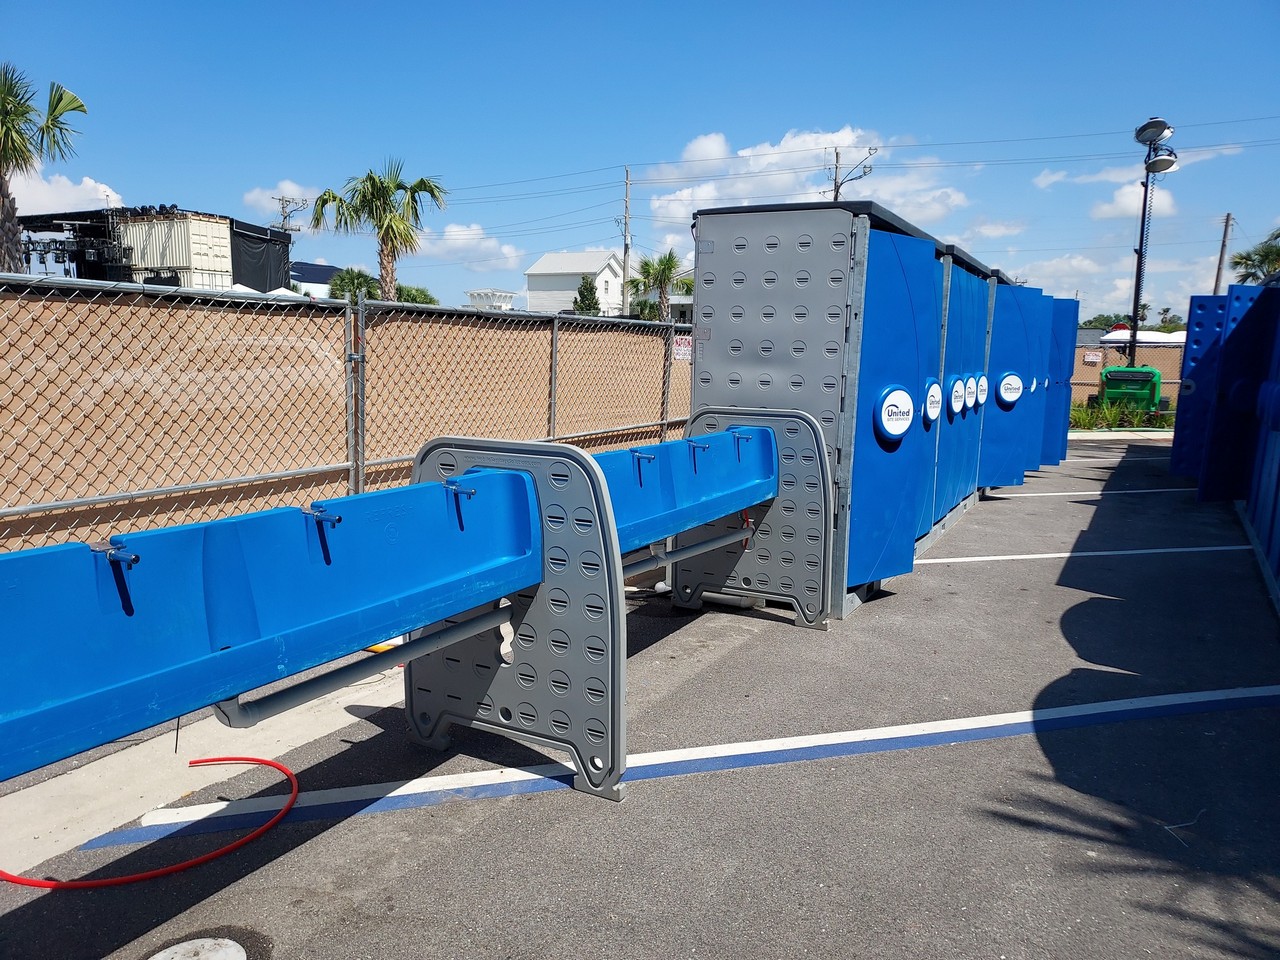 Row of blue Hydroflow sinks connected to portable restrooms in a parking lot with palm trees and a blue sky in the background